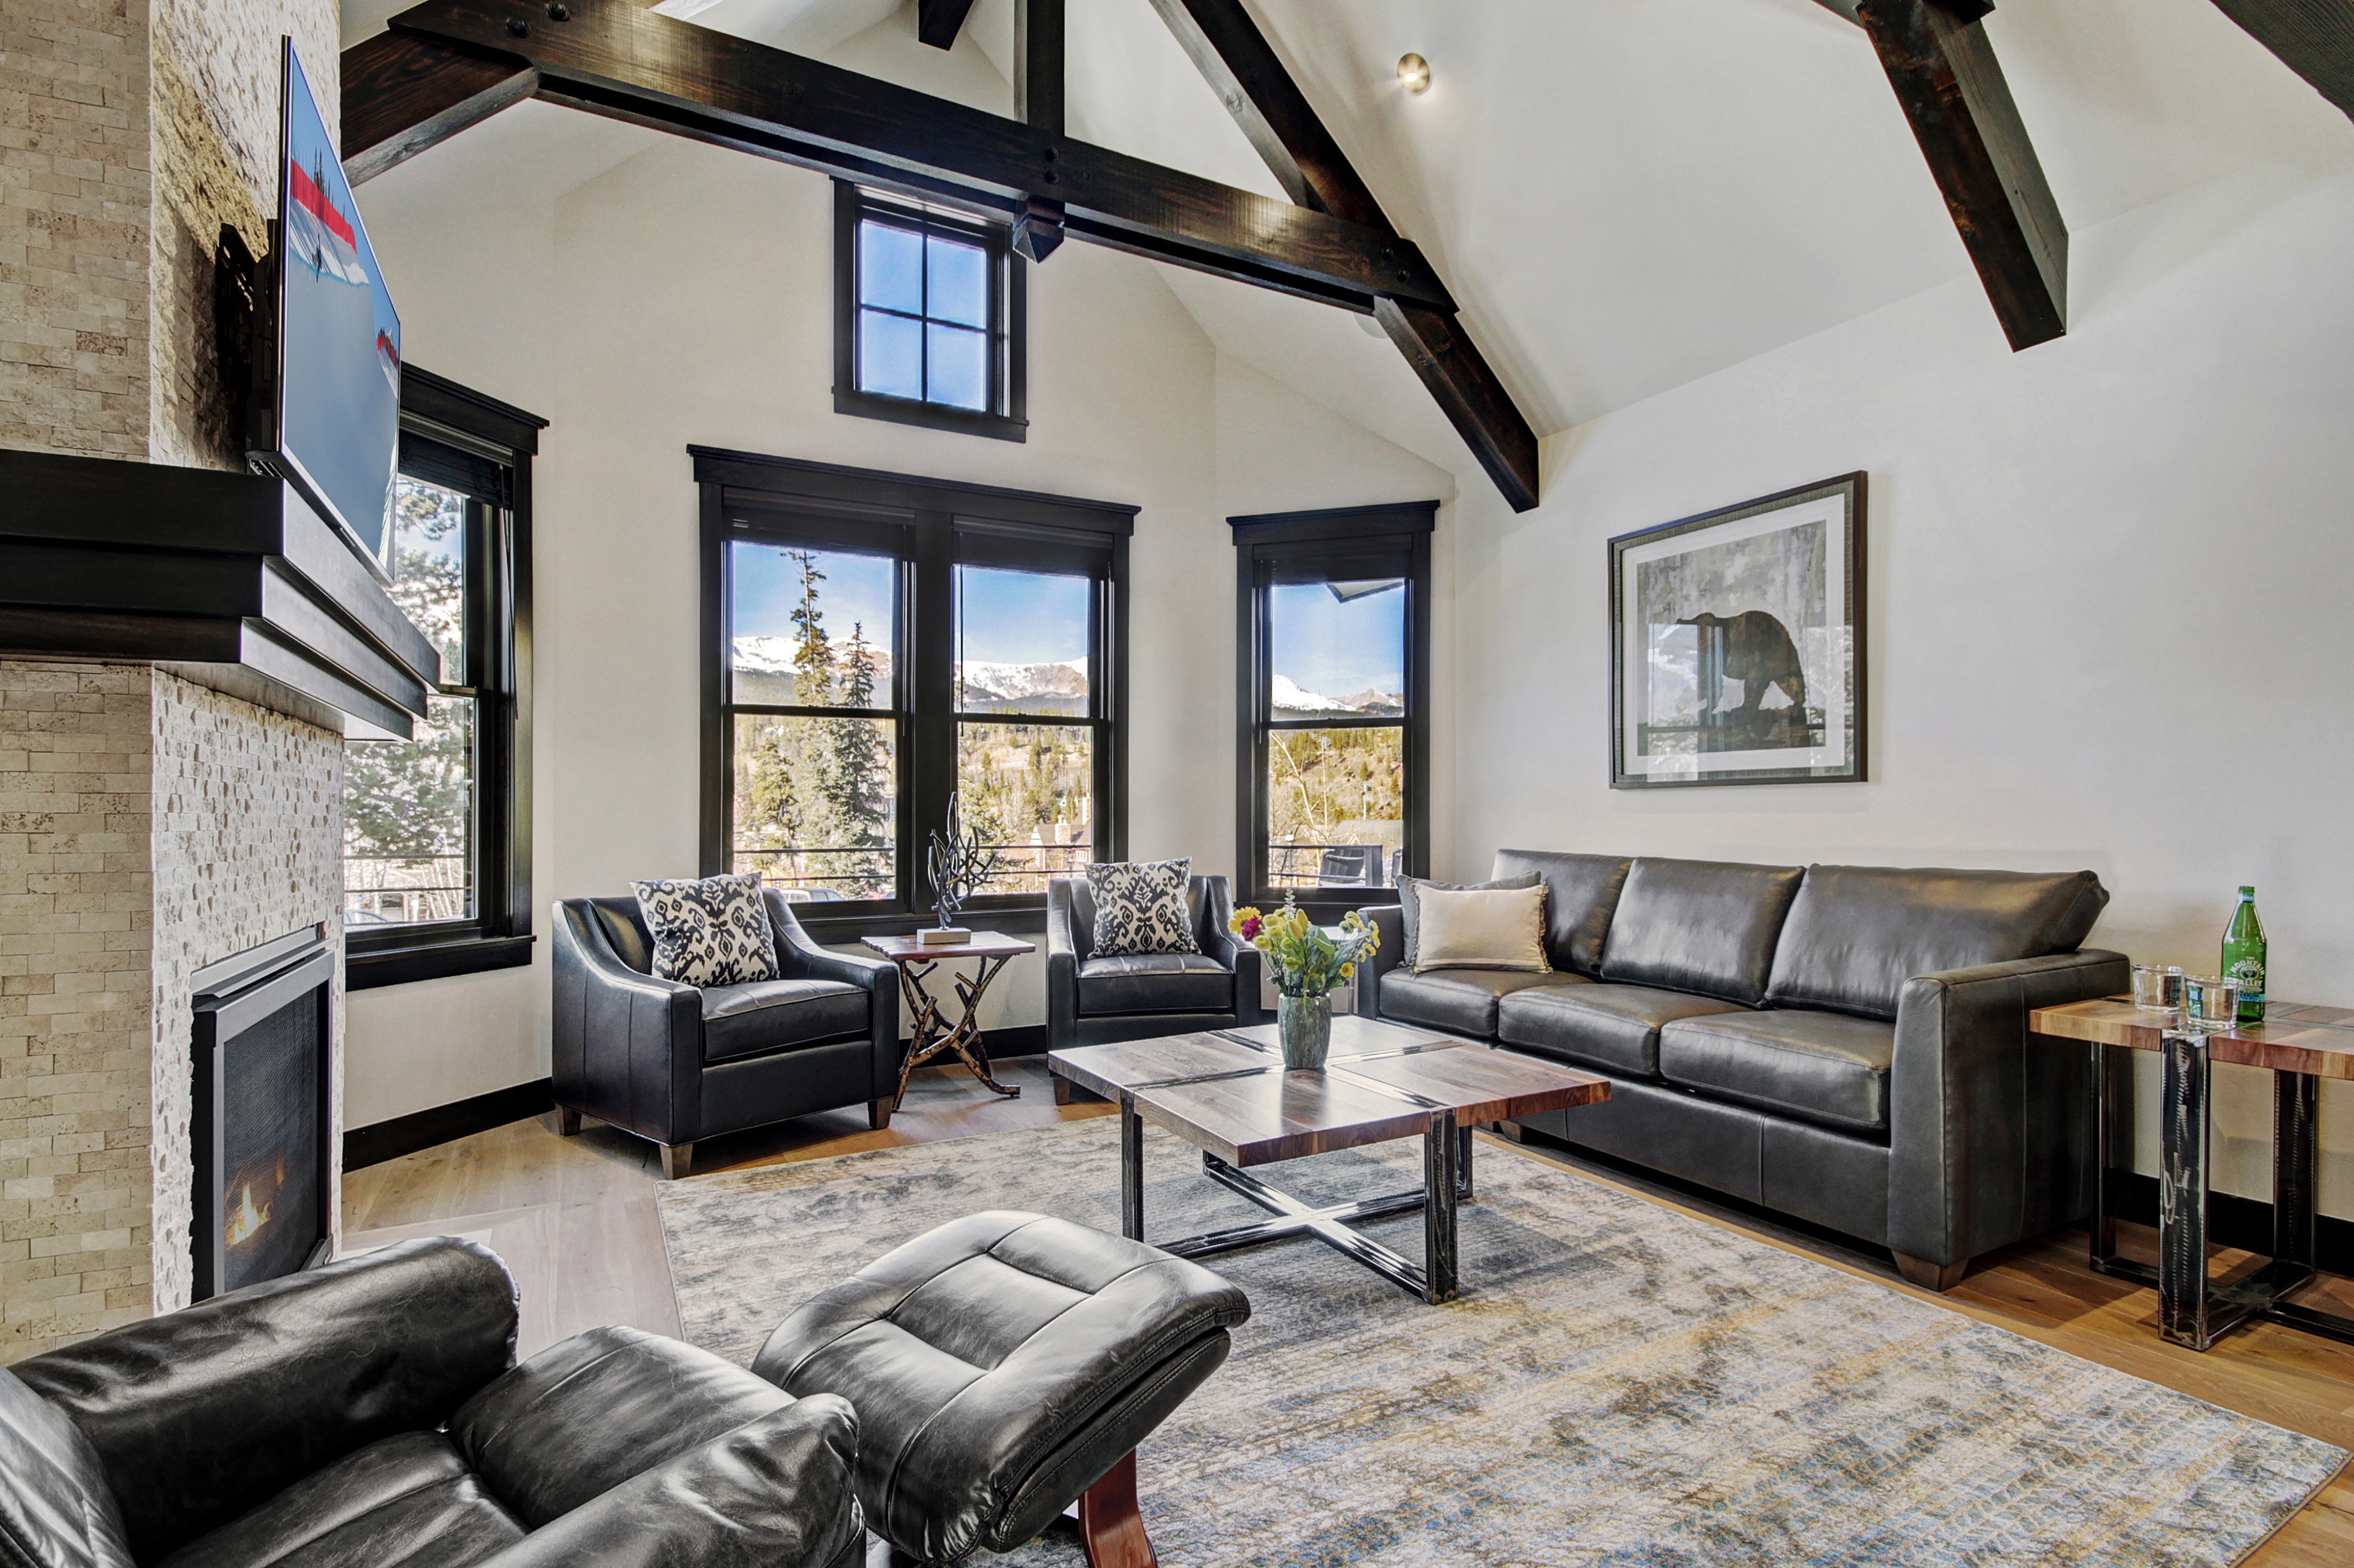 Additional view of living area with views of the Ten Mile Range - The Bogart House Breckenridge Vacation Rental